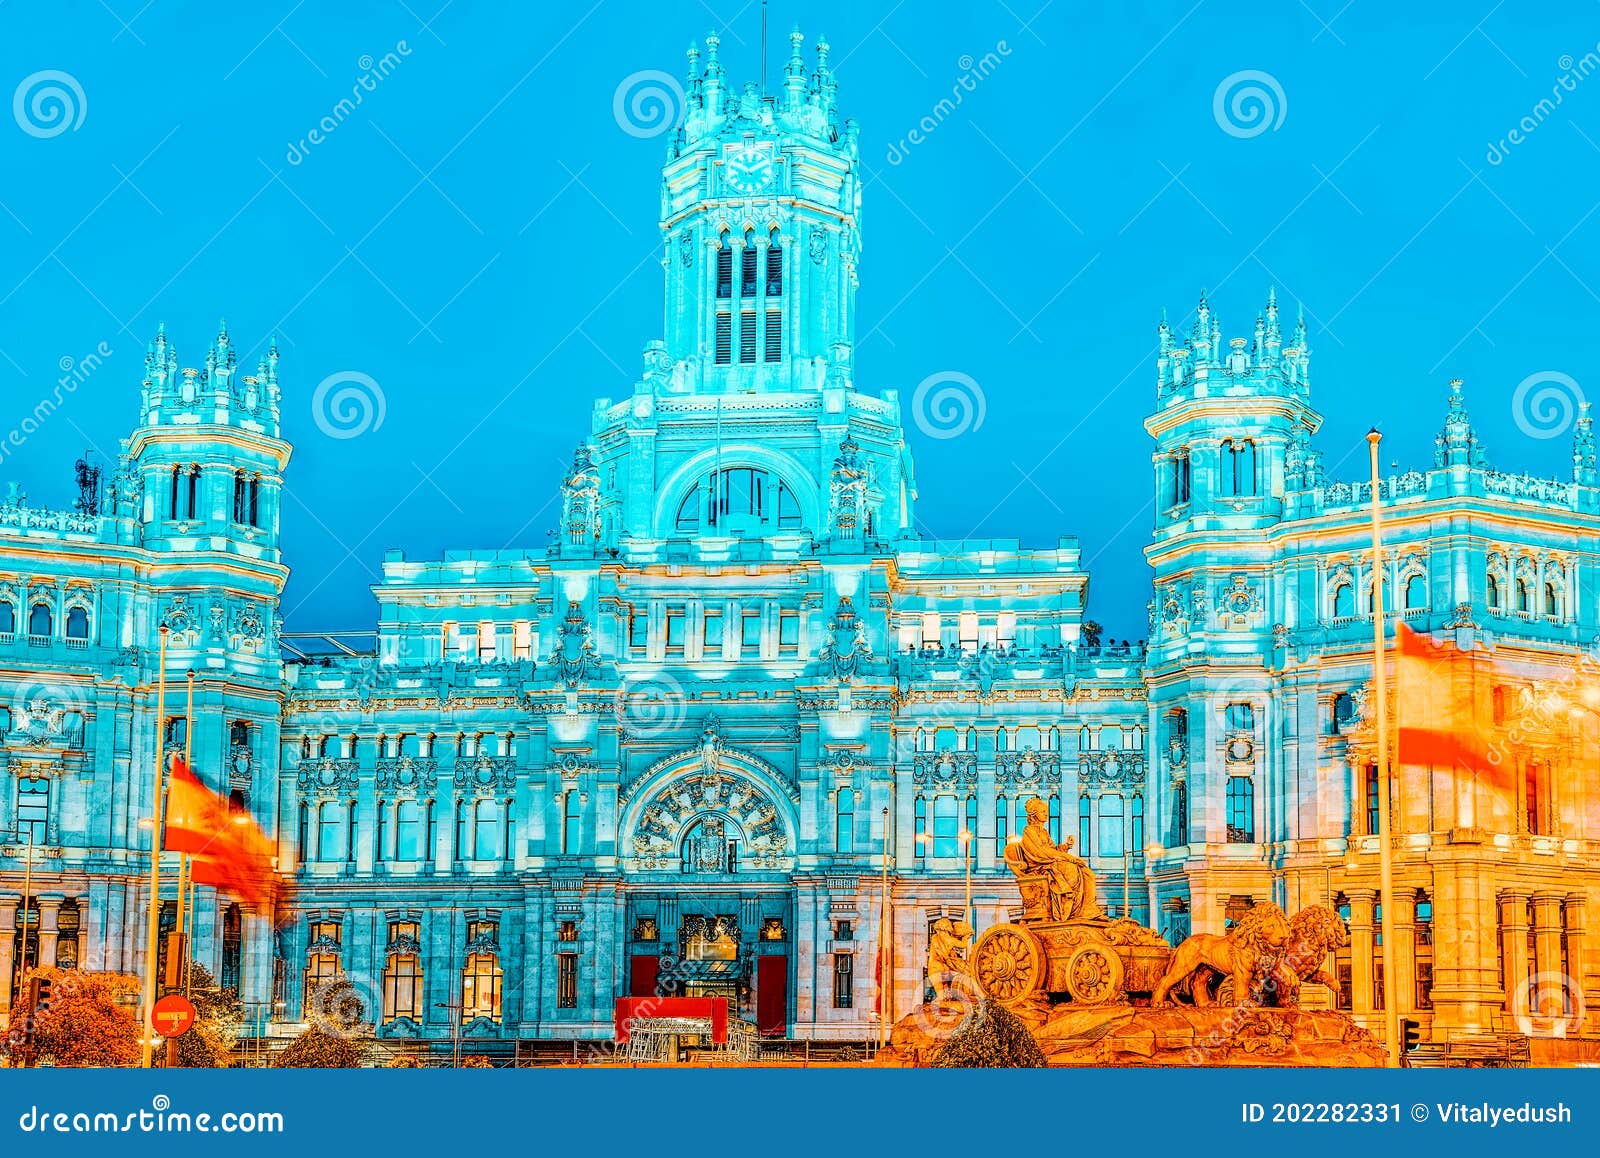 fountain of the goddess cibeles and cibeles center or  palace of